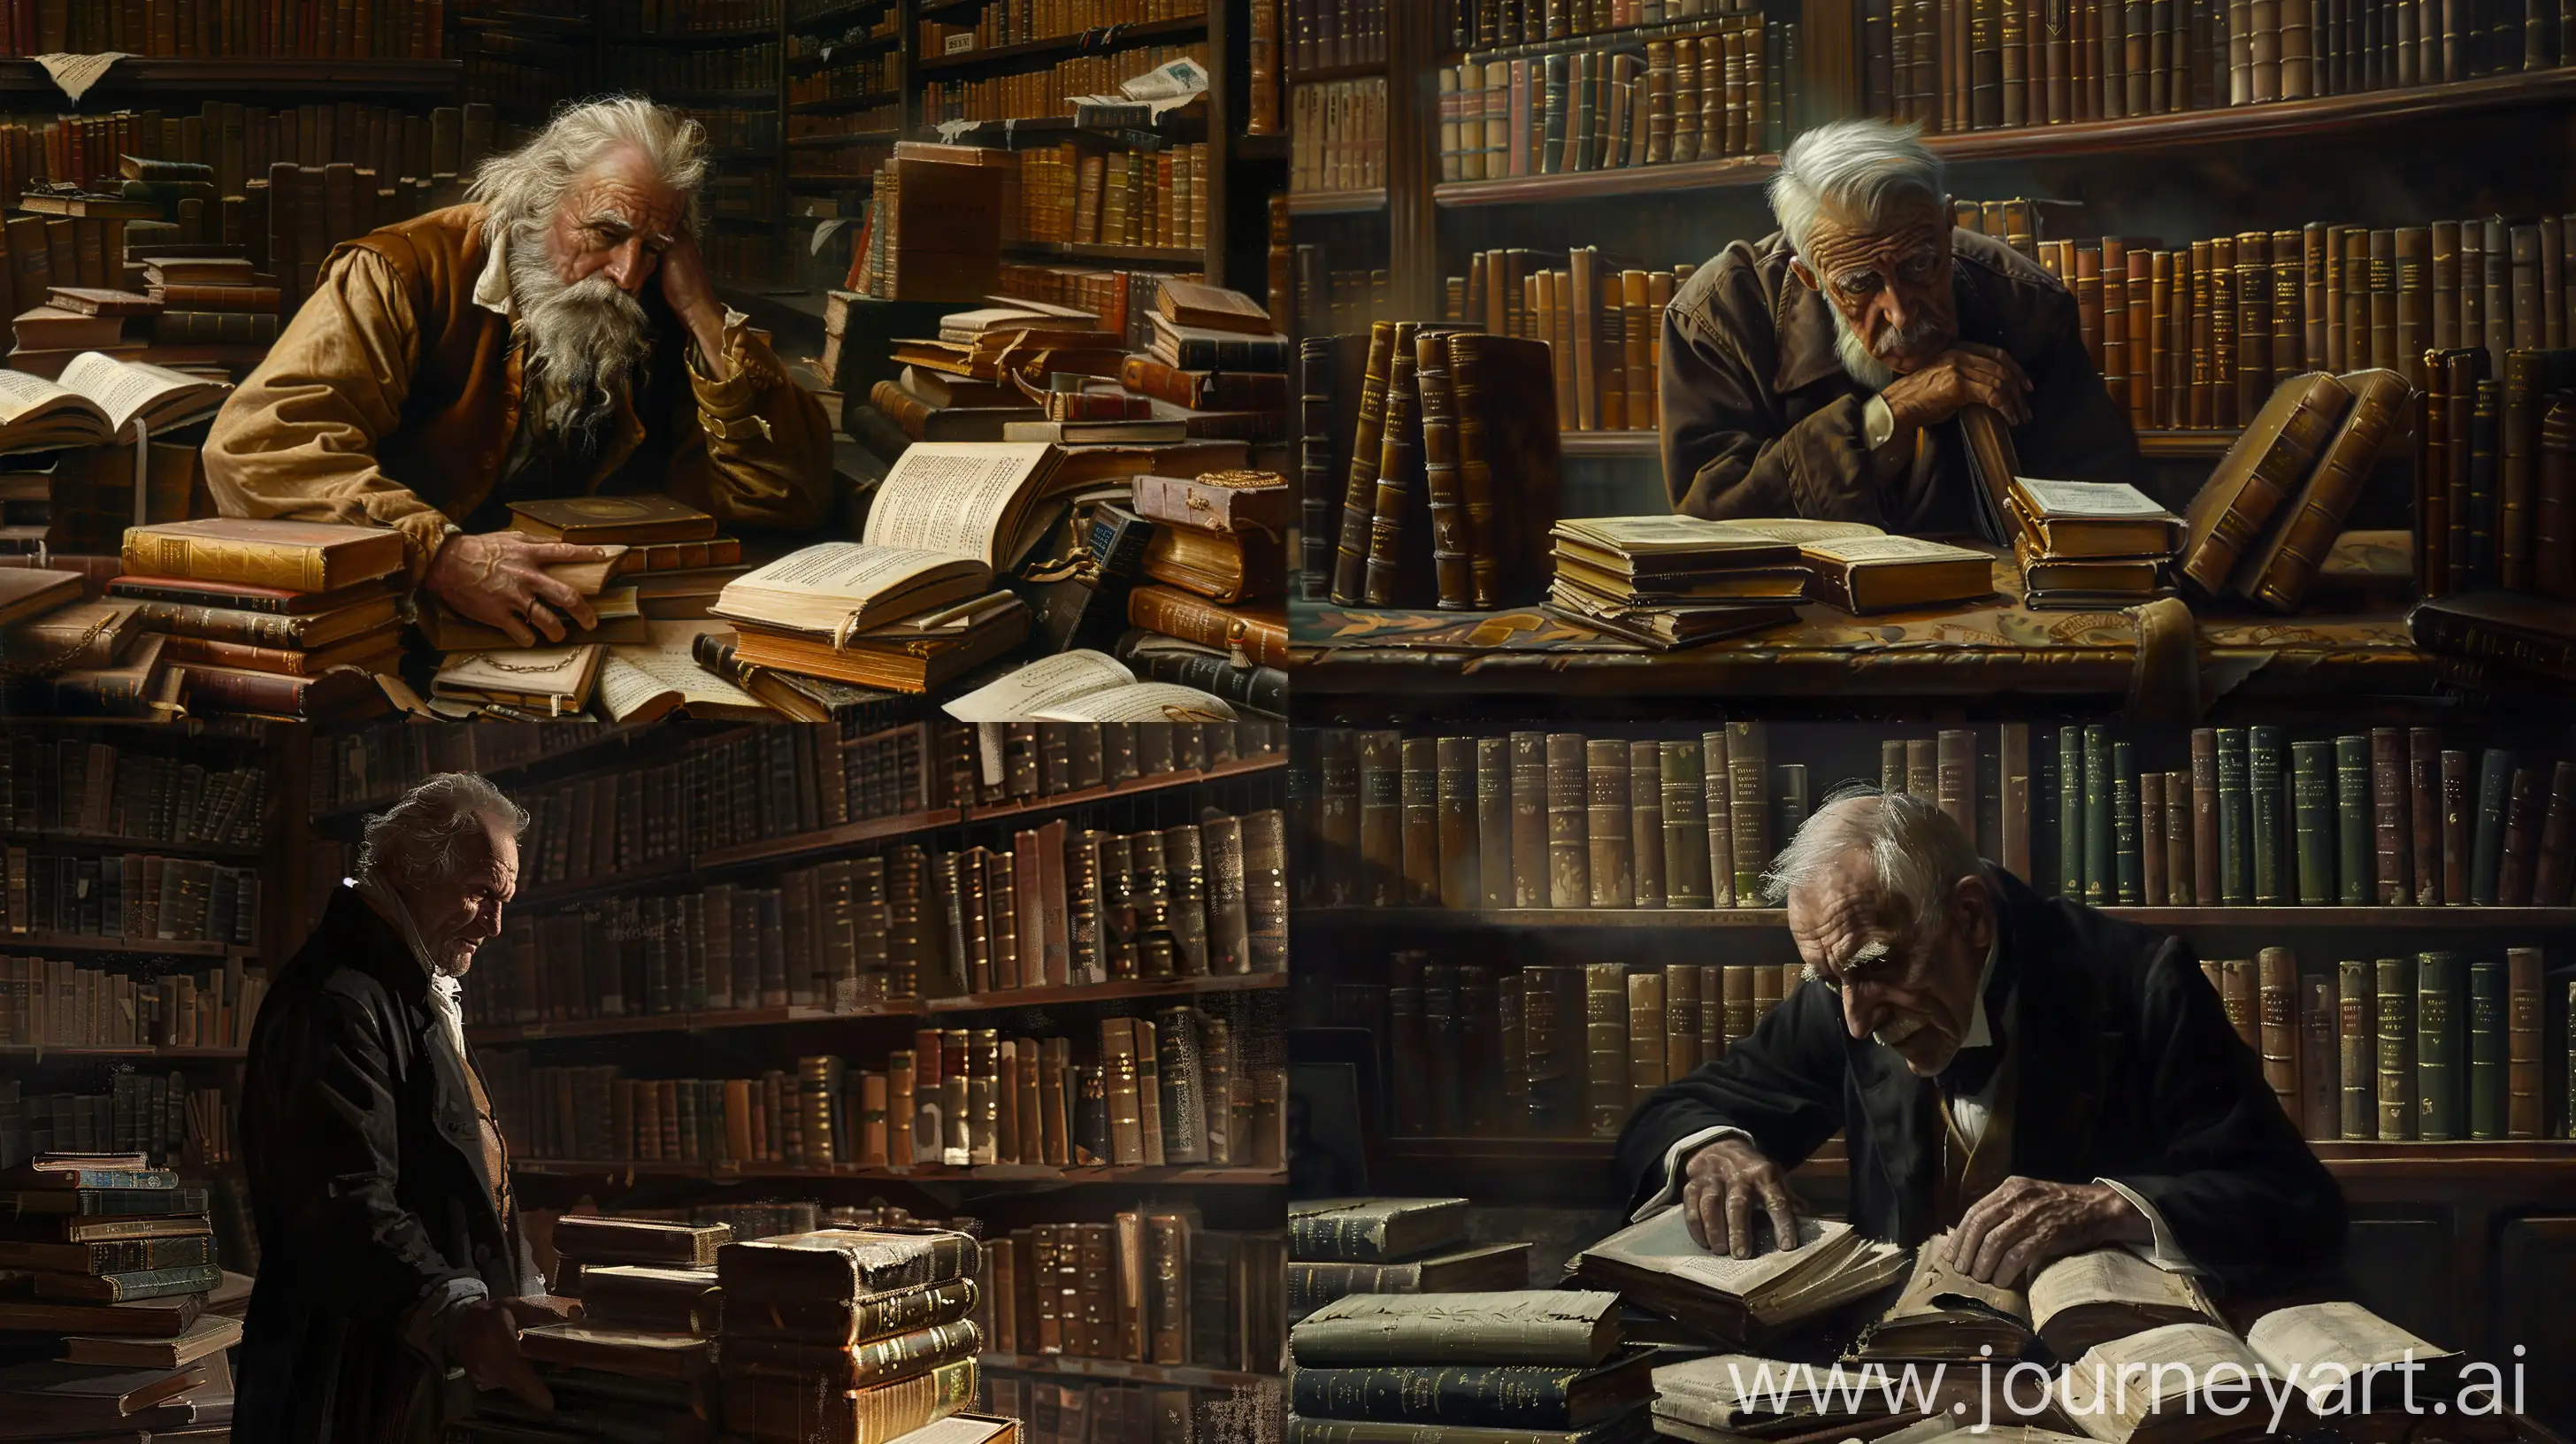 Portrait-of-a-Thoughtful-Antiquarian-Surrounded-by-Ancient-Books-in-a-Historical-Library